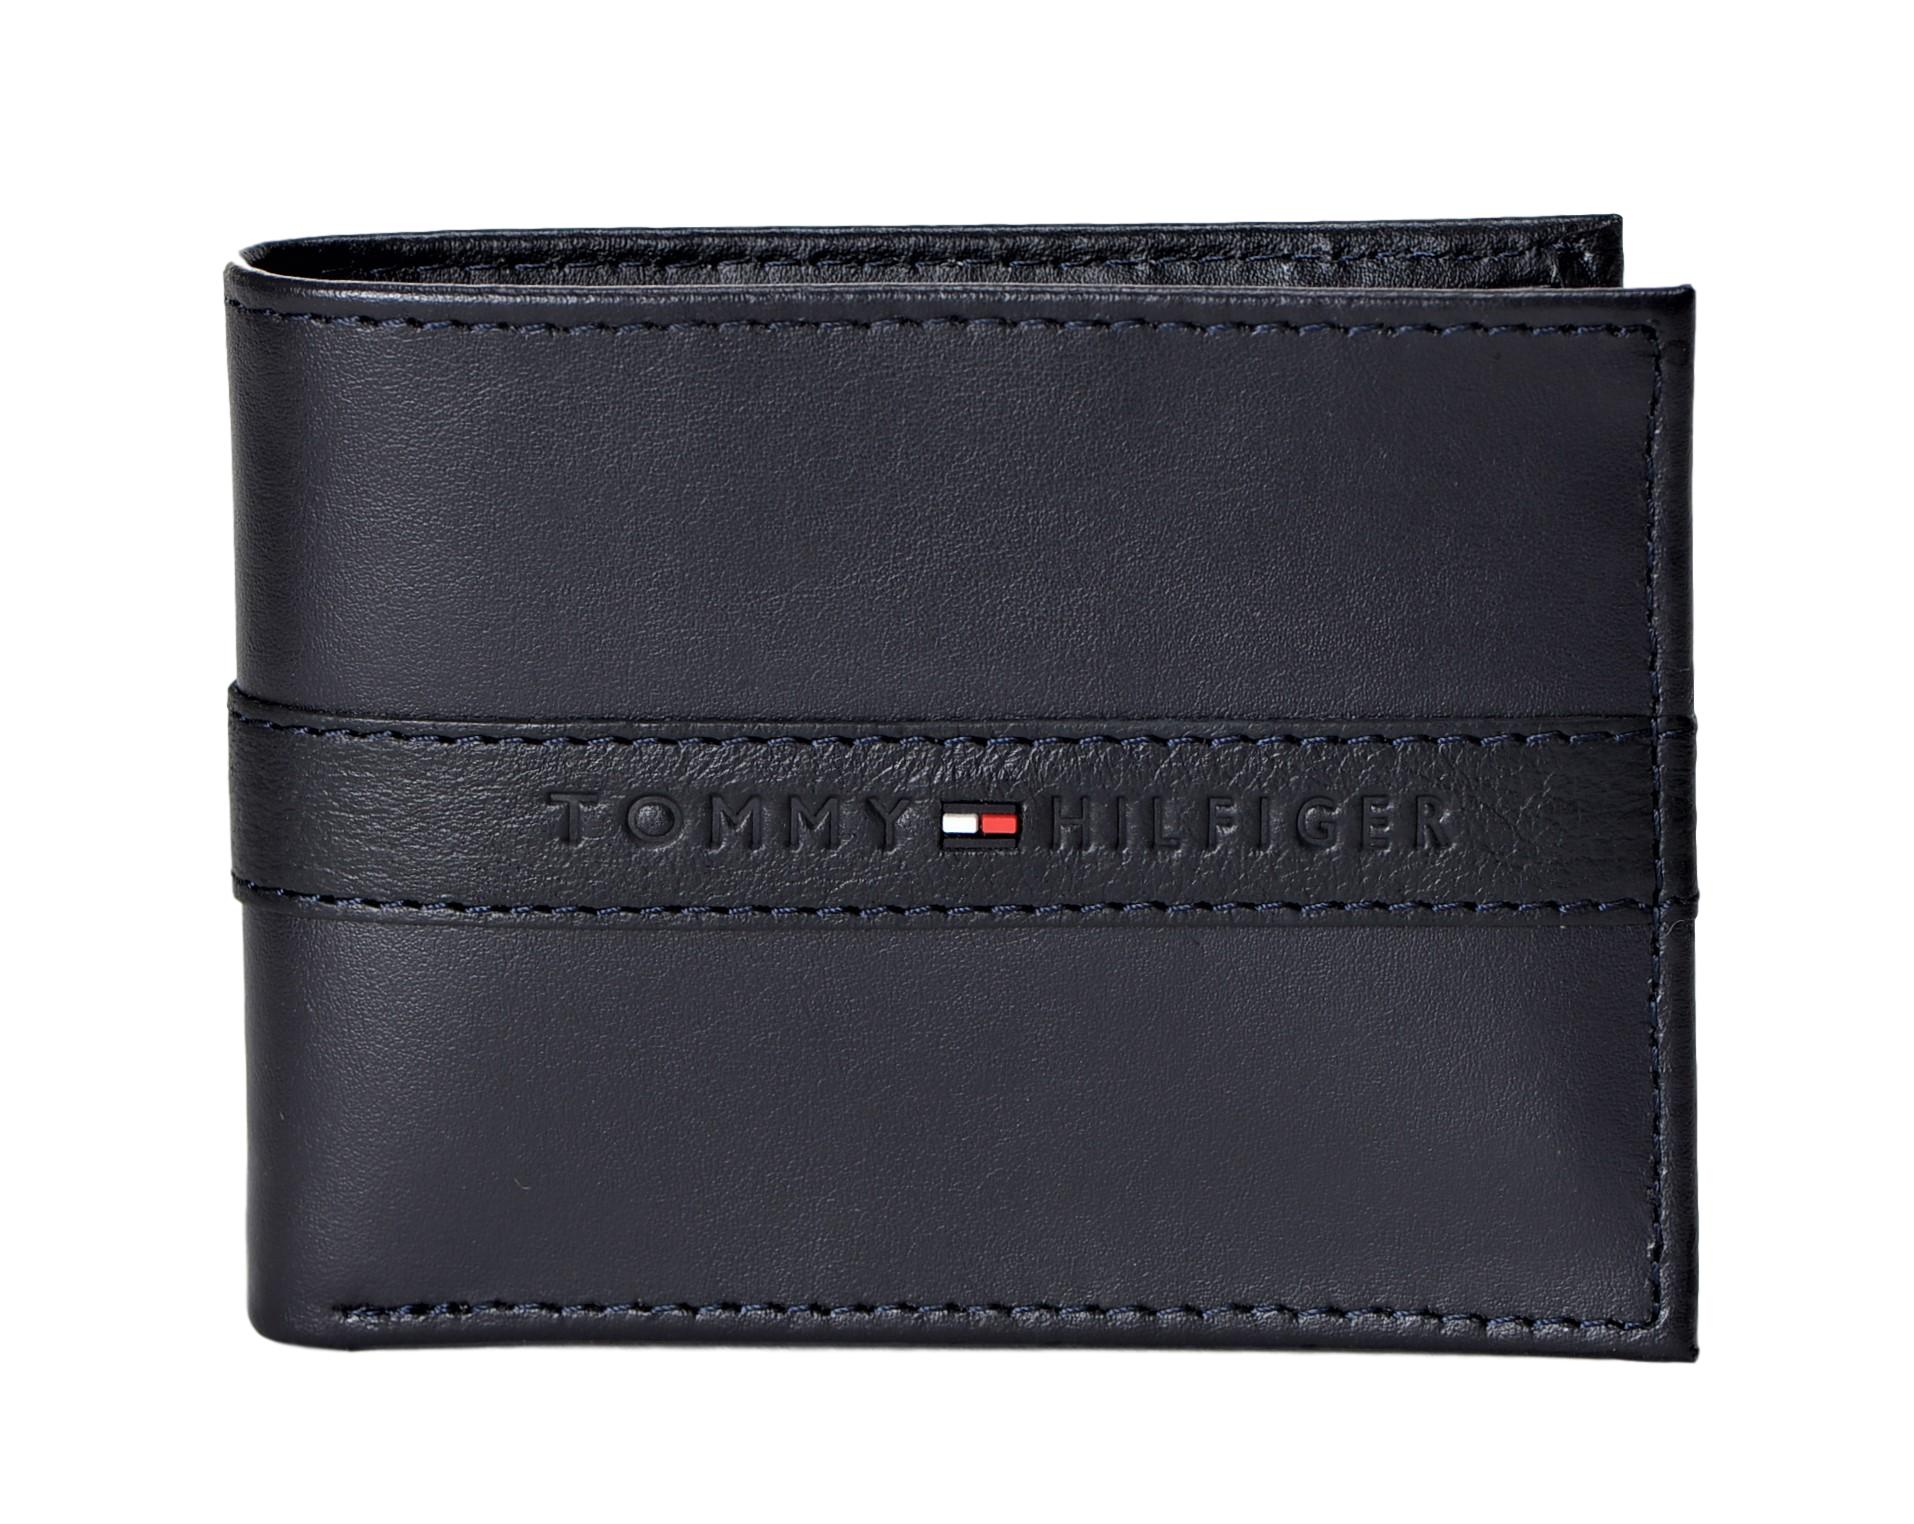 Tommy Hilfiger Men's RFID Blocking Leather Passcase Wallet Navy - image 1 of 7